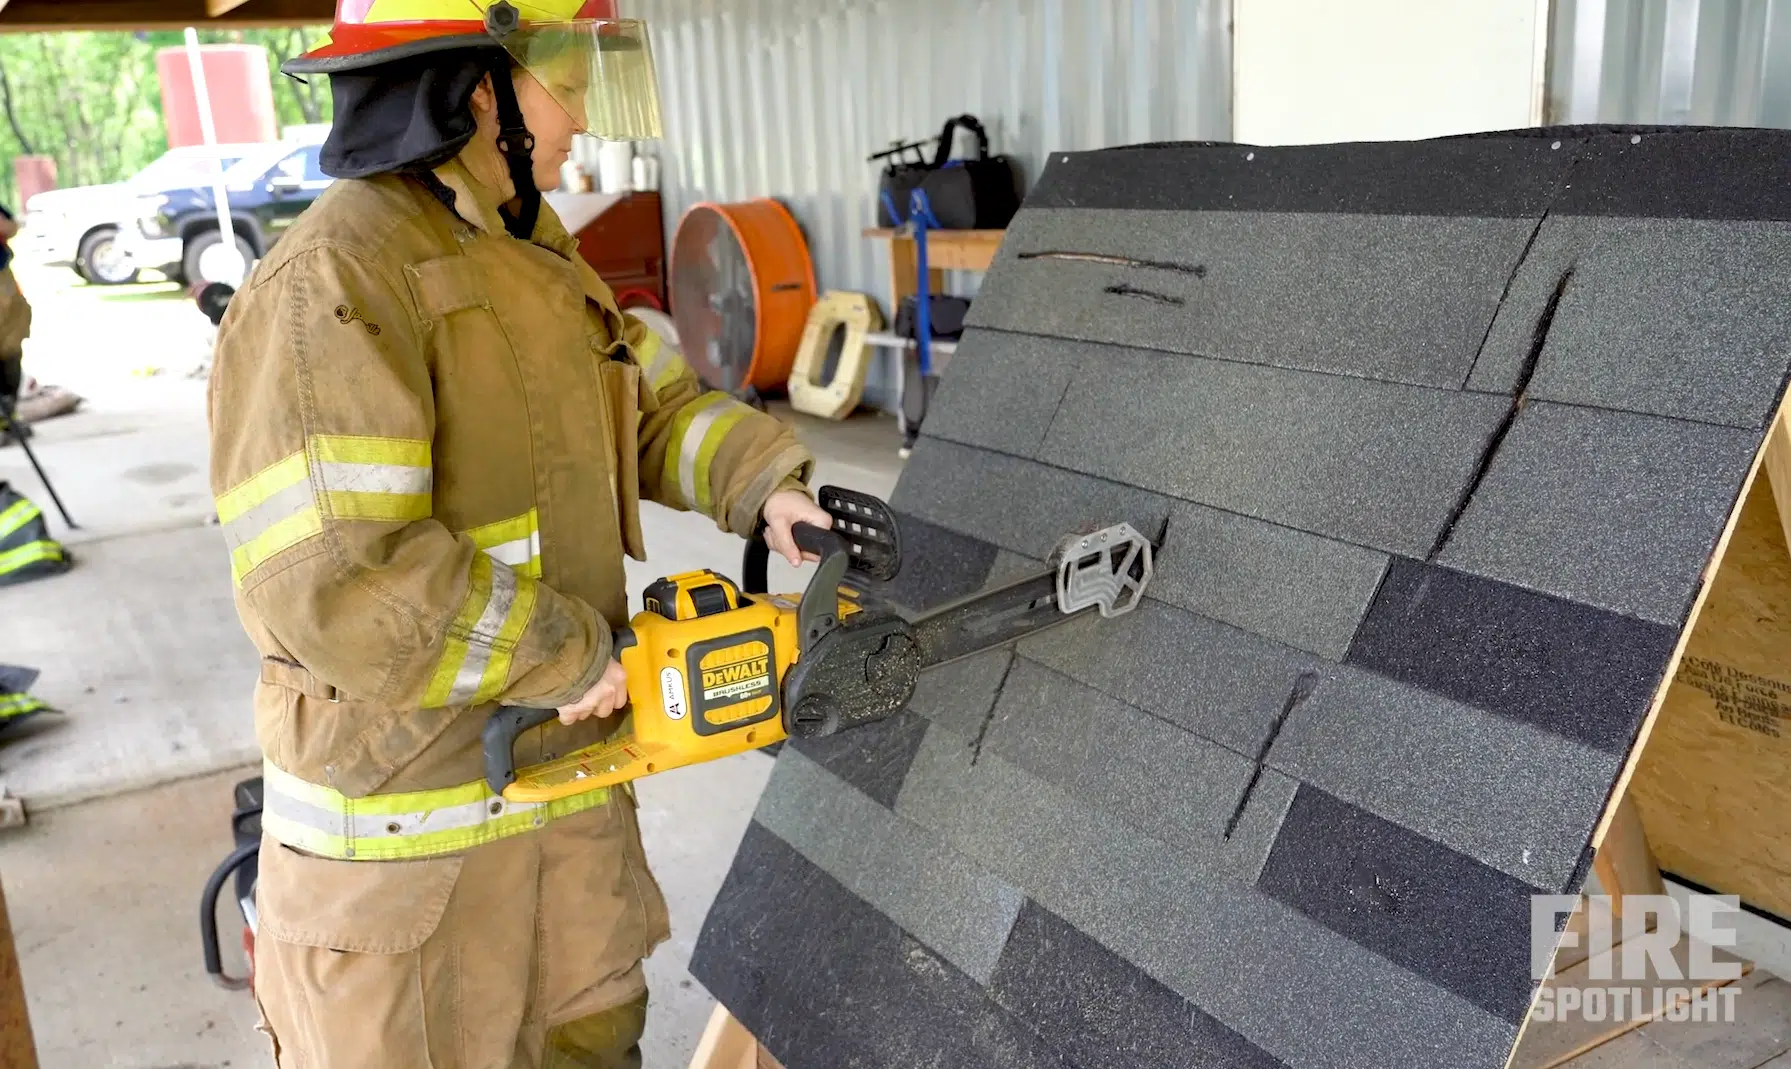 Featured image for “Firefighter Chainsaw Training Video Covers Basic Firefighter Roof Ventilation Cuts/Principles”